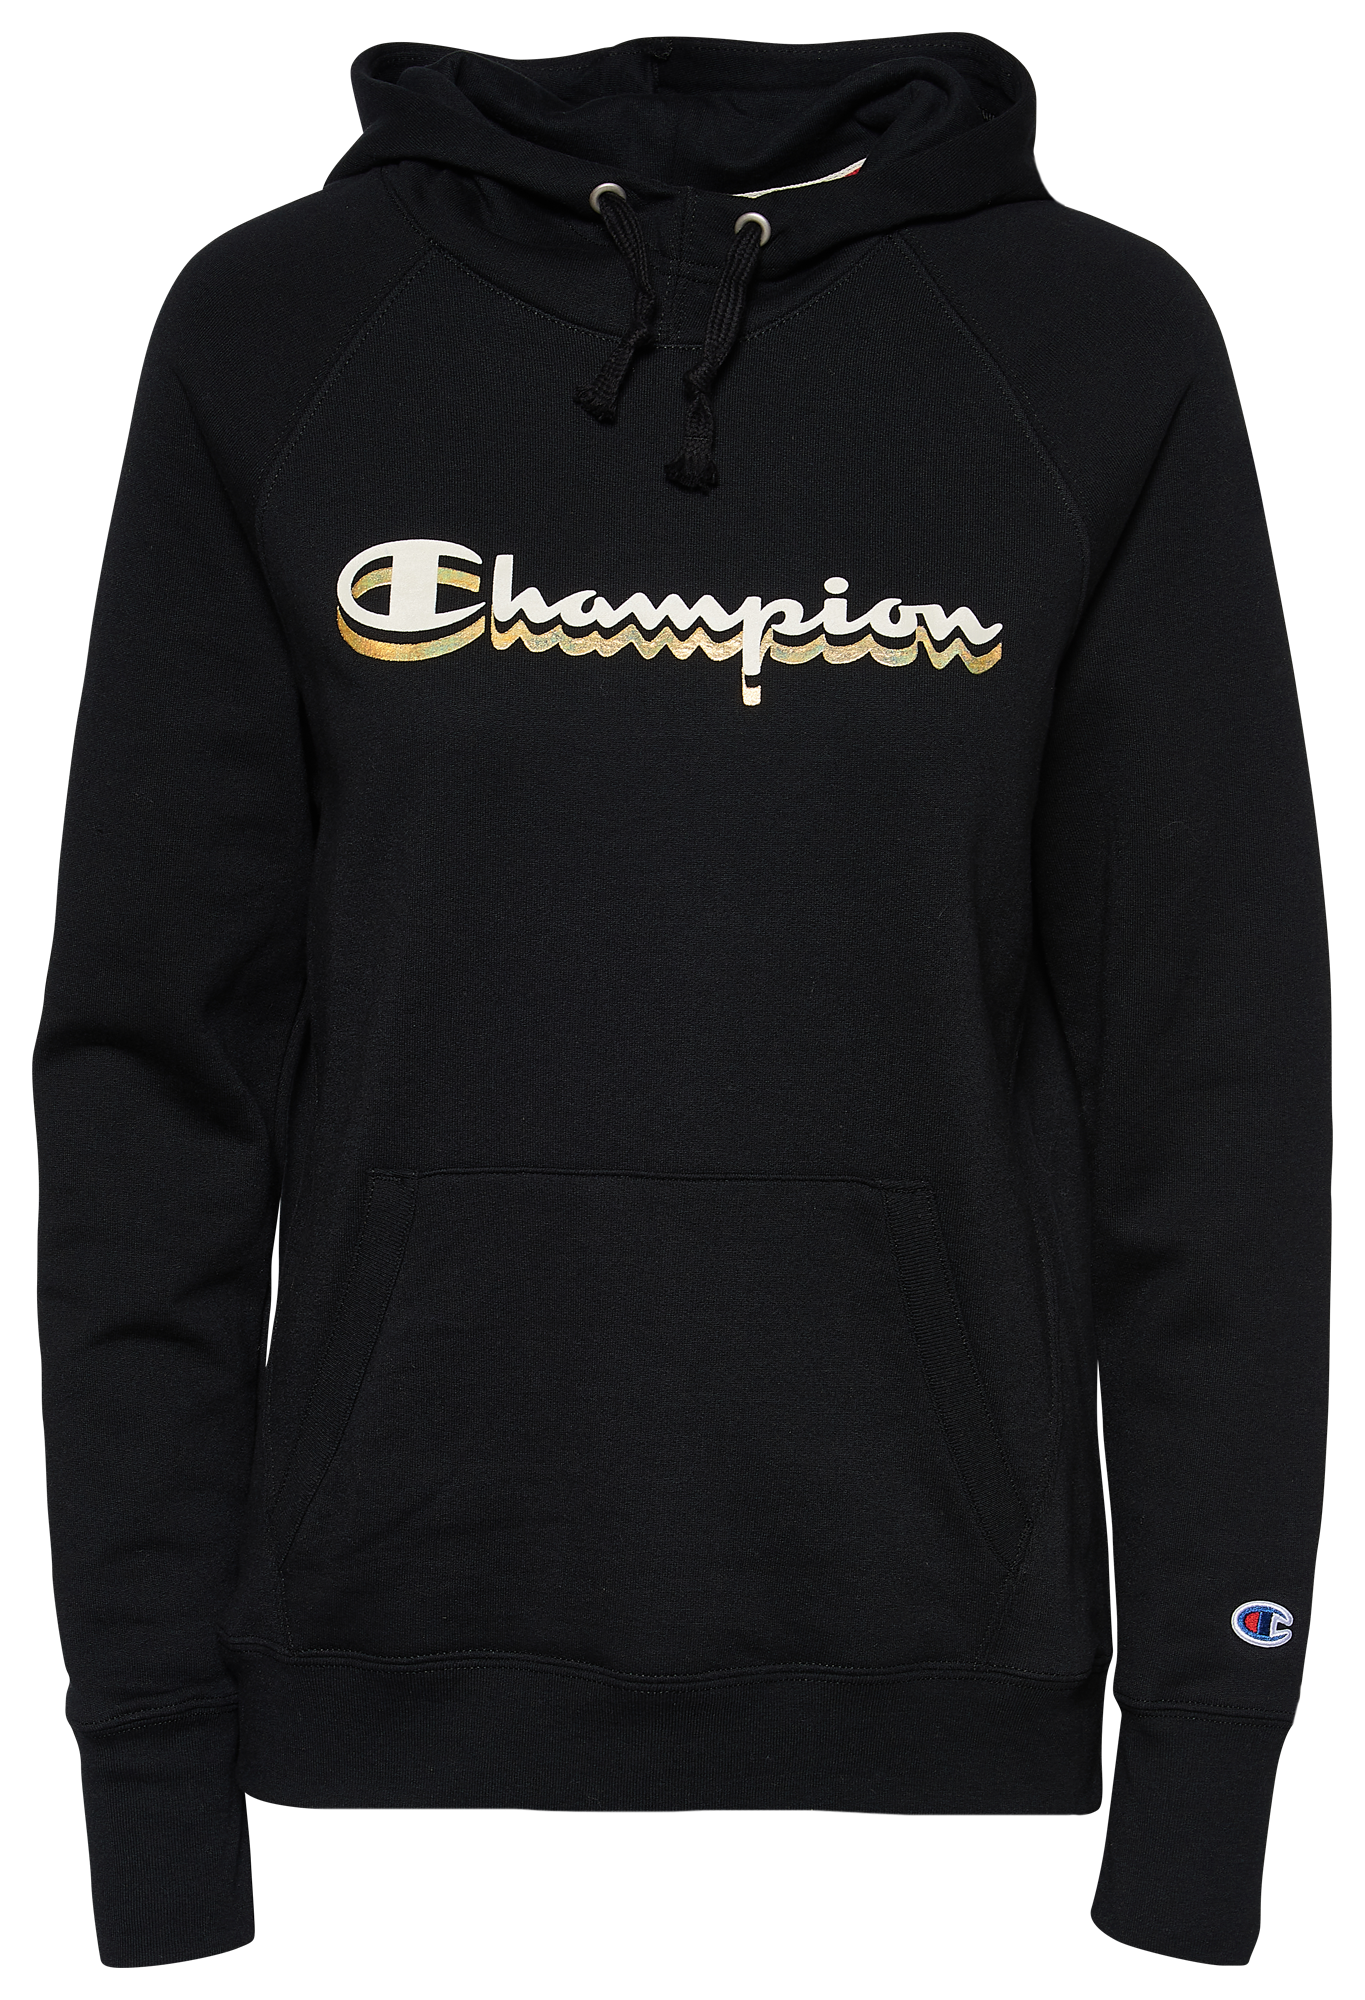 Champion Powerblend Drop Shadow Hoodie | Champs Sports